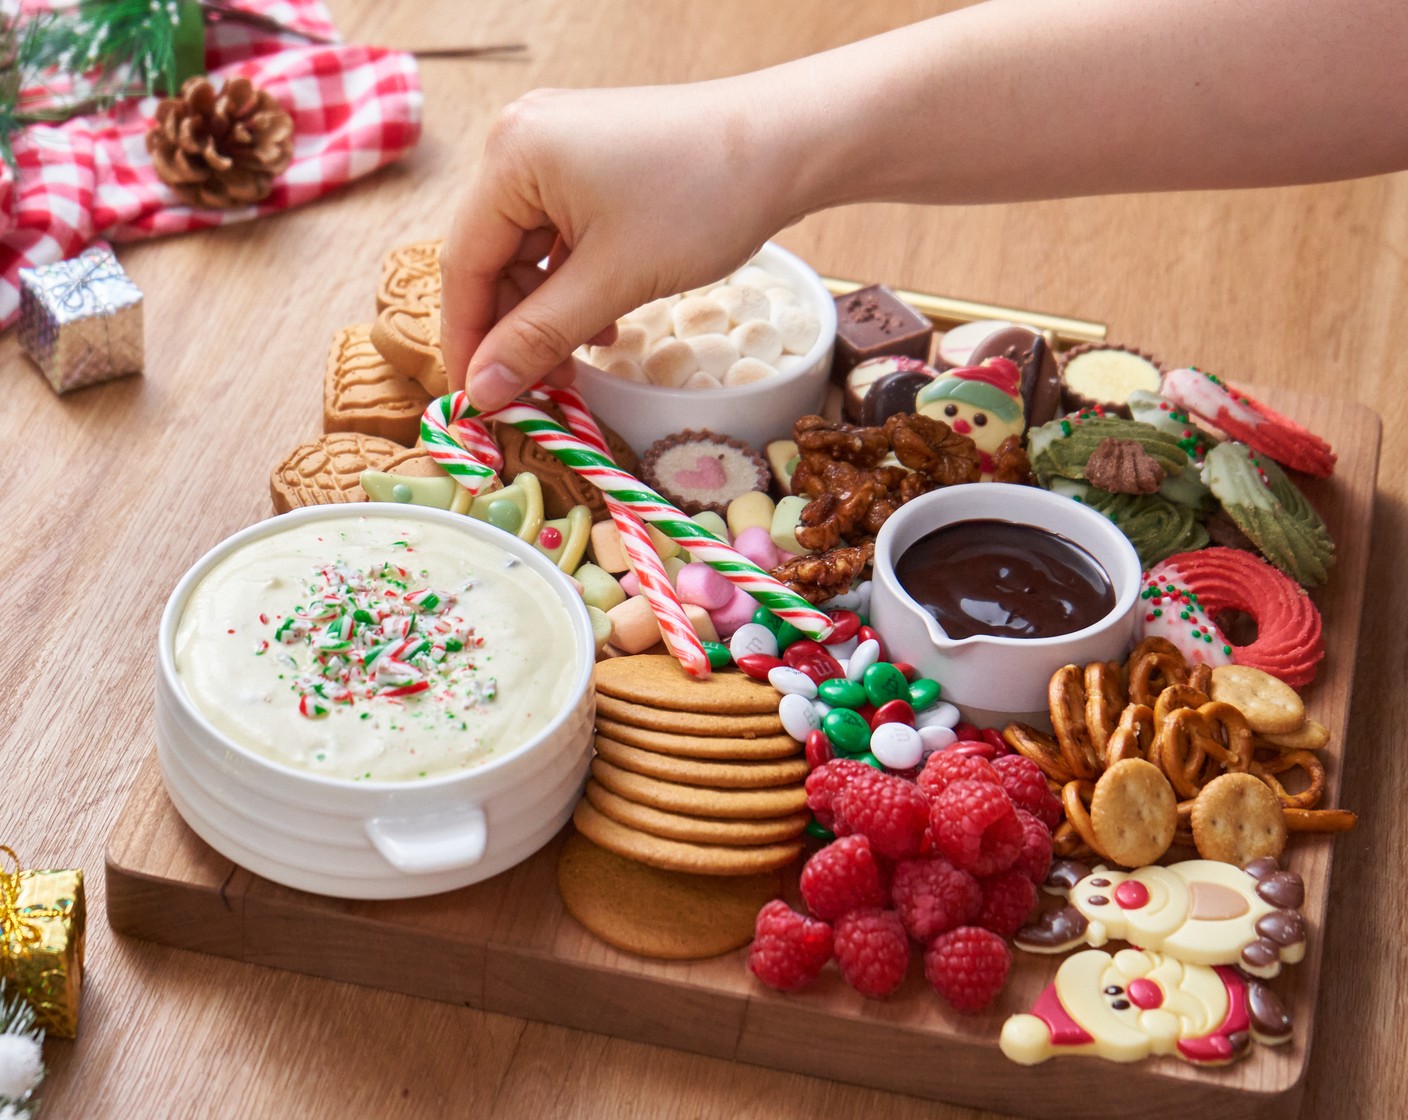 step 4 Arrange the White Chocolate (1/3 cup), Milk Chocolate (1/3 cup), Mini Colored Marshmallows (1/2 cup), M&M's® Milk Chocolate Candy Holiday Colors (1/4 cup), Candied Walnuts (1/4 cup), Fresh Raspberry (1/2 cup), Fresh Strawberry (1/2 cup), and Candy Canes (4) on the board to fill up the empty spaces, enjoy with family and friends!